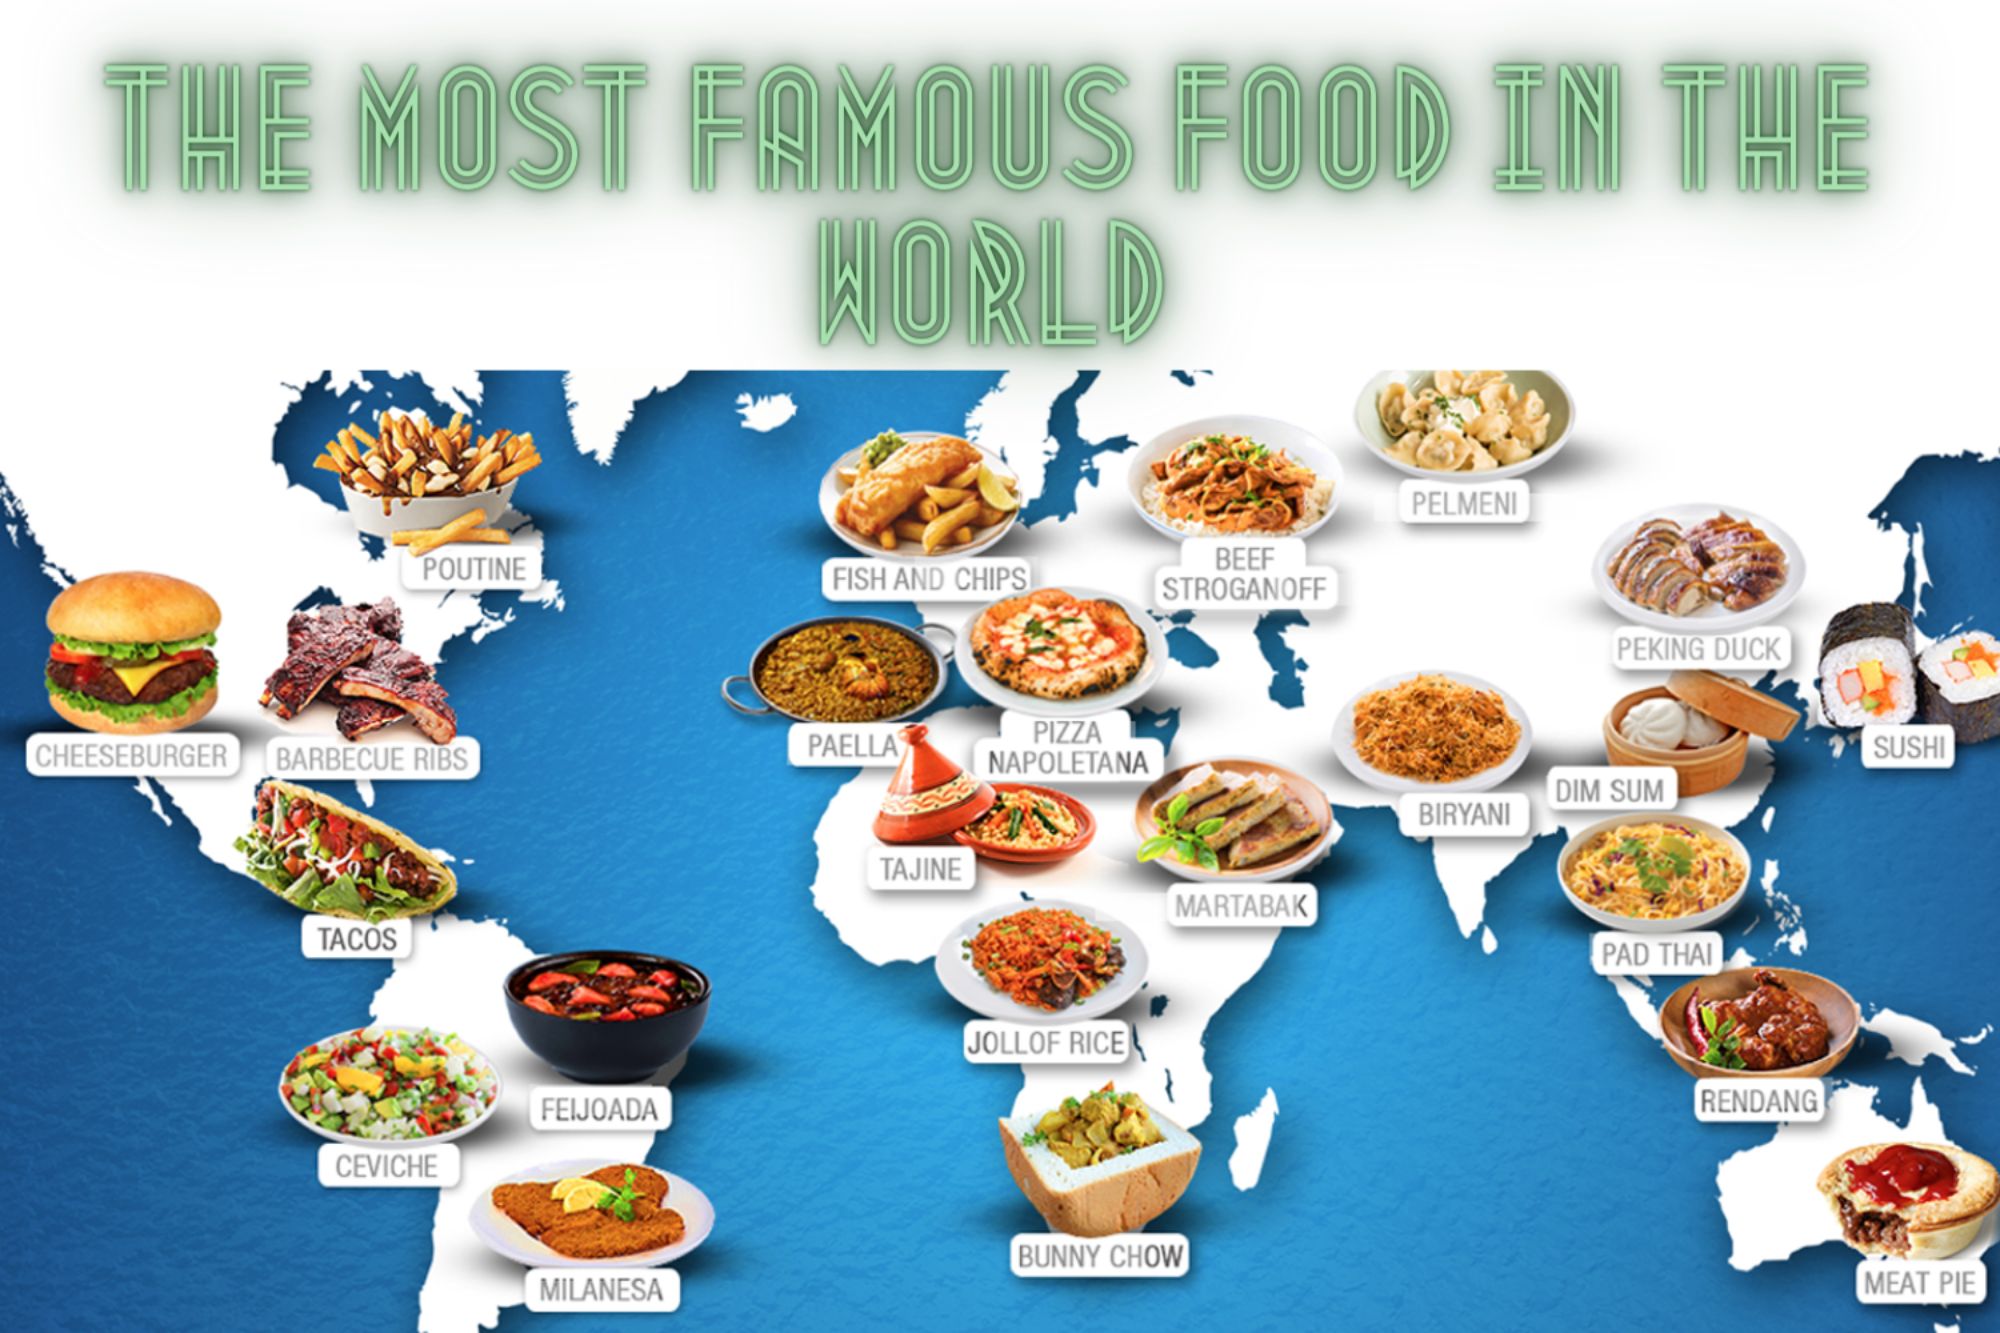 The Most Famous Food in the World